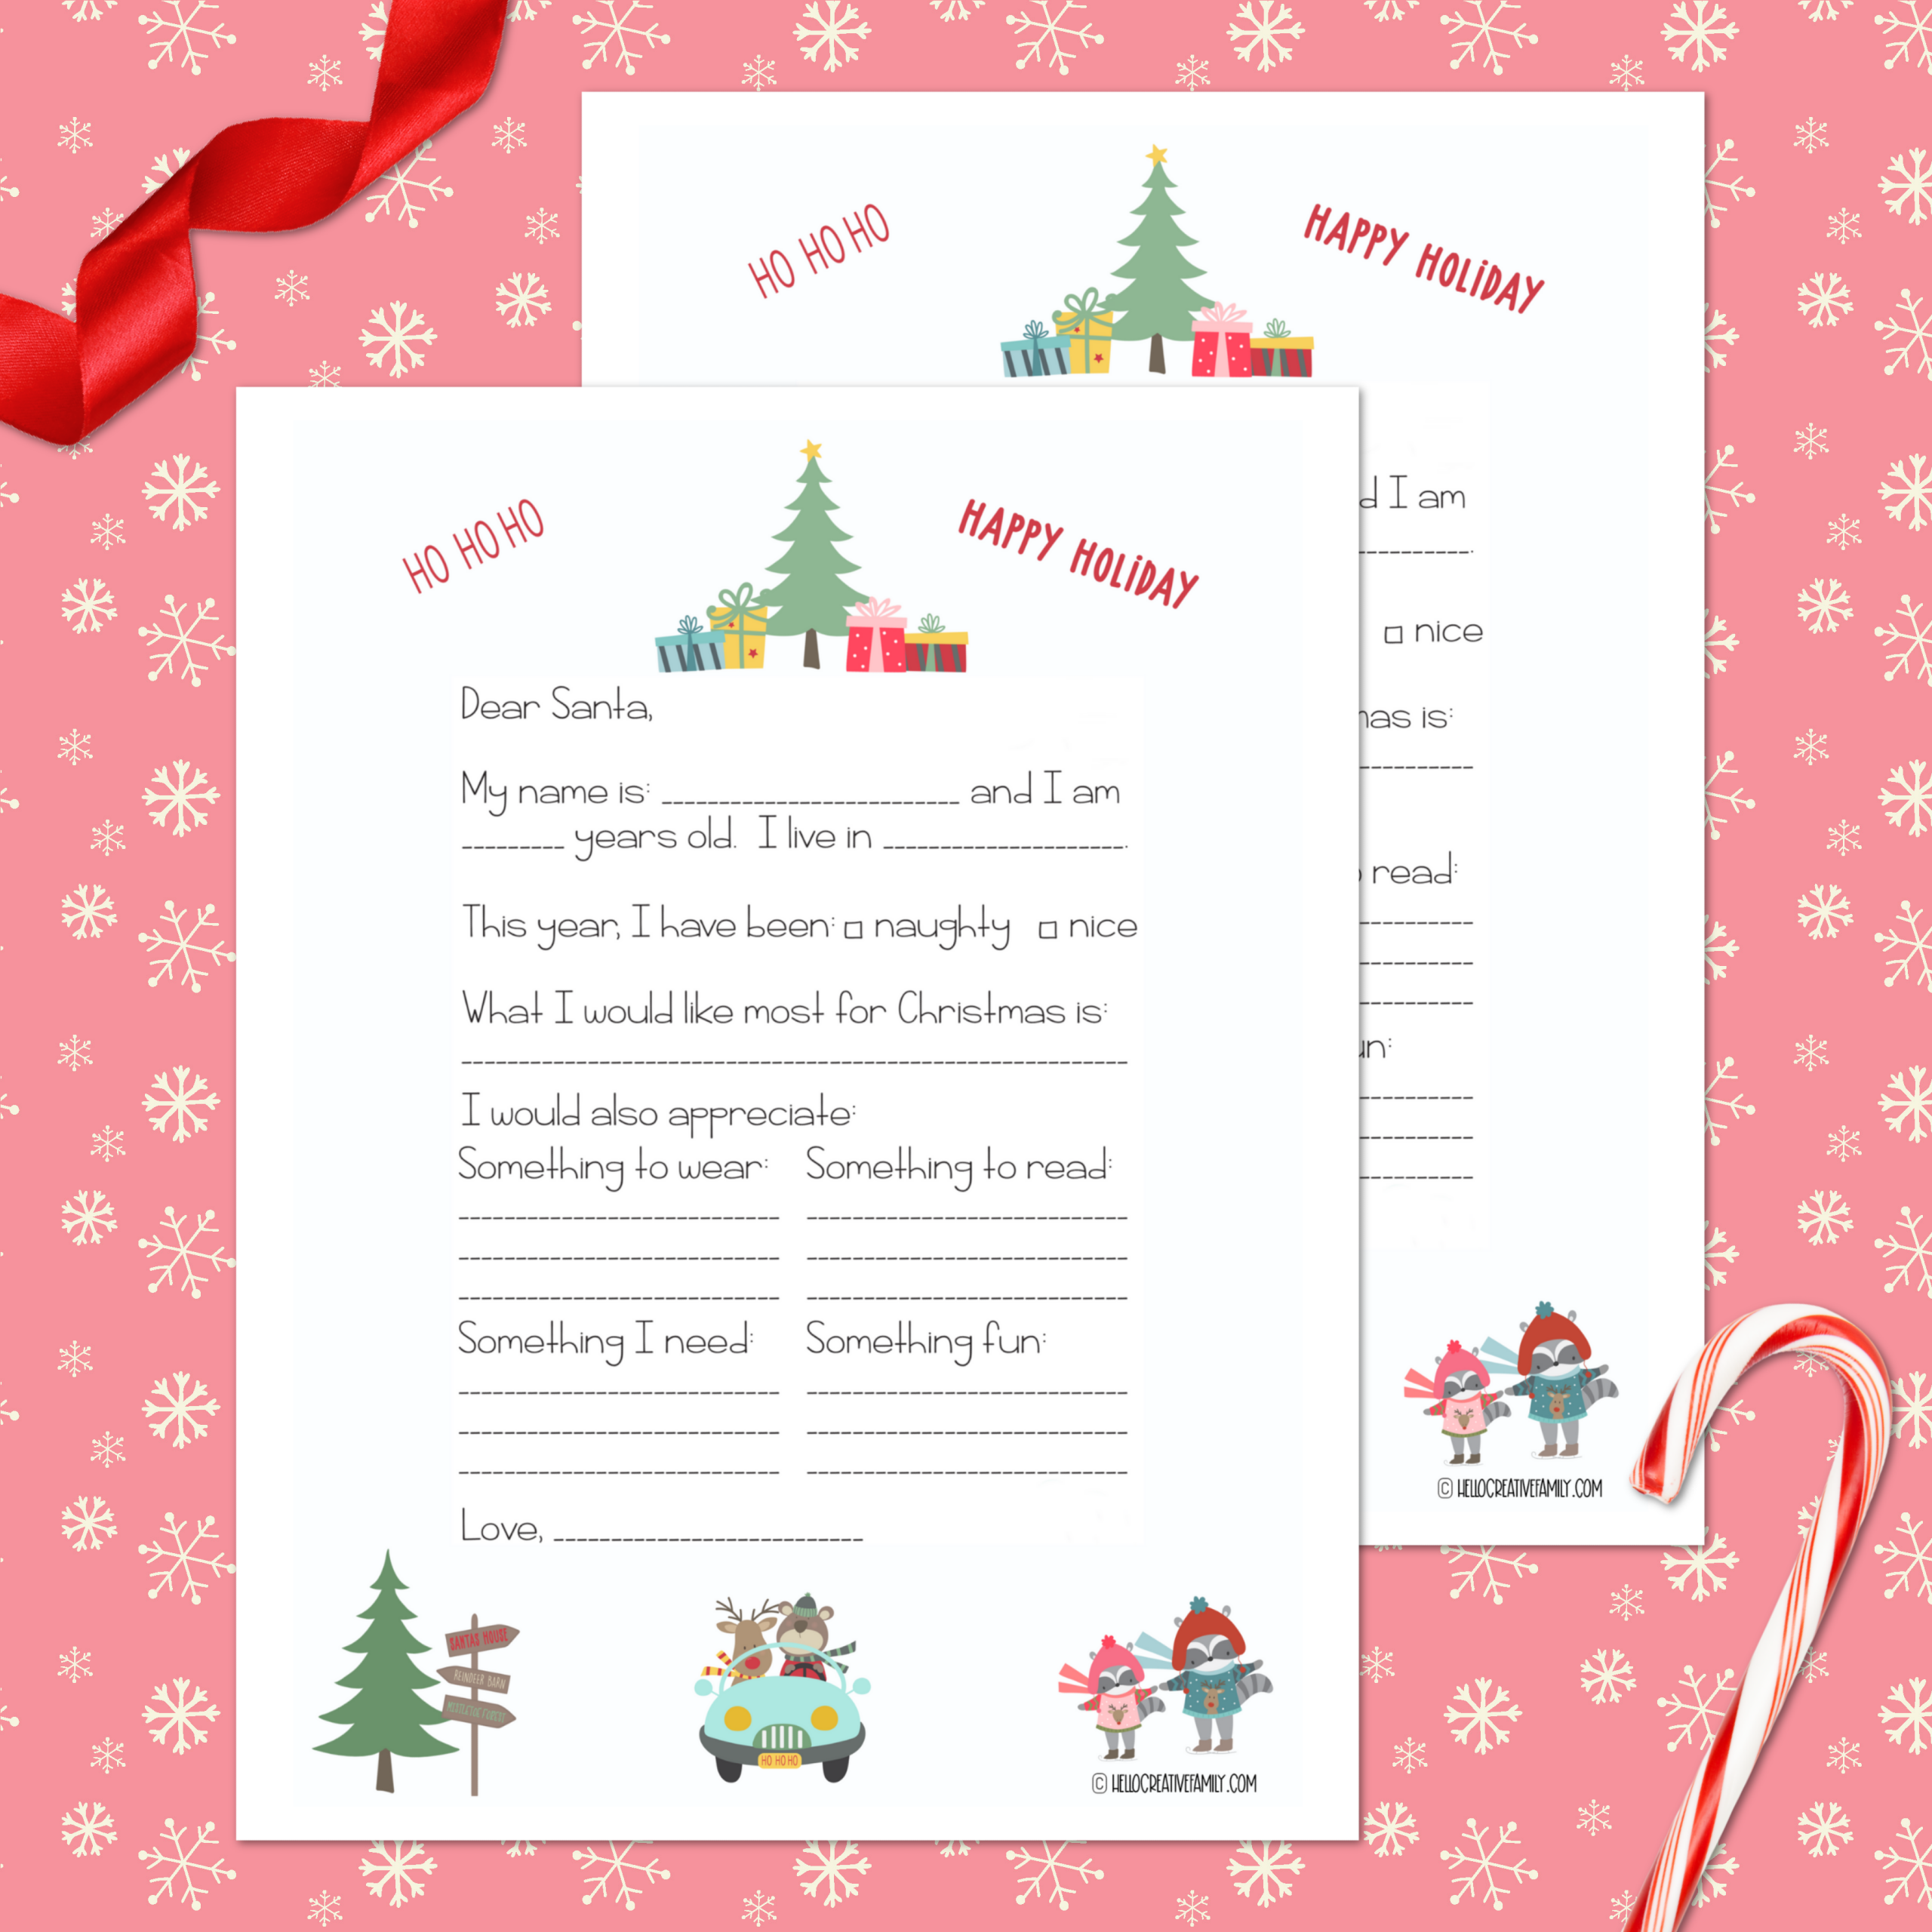 Free Santa Letter Printable Template + 23 Holiday Printables Regarding Free Letters From Santa Template